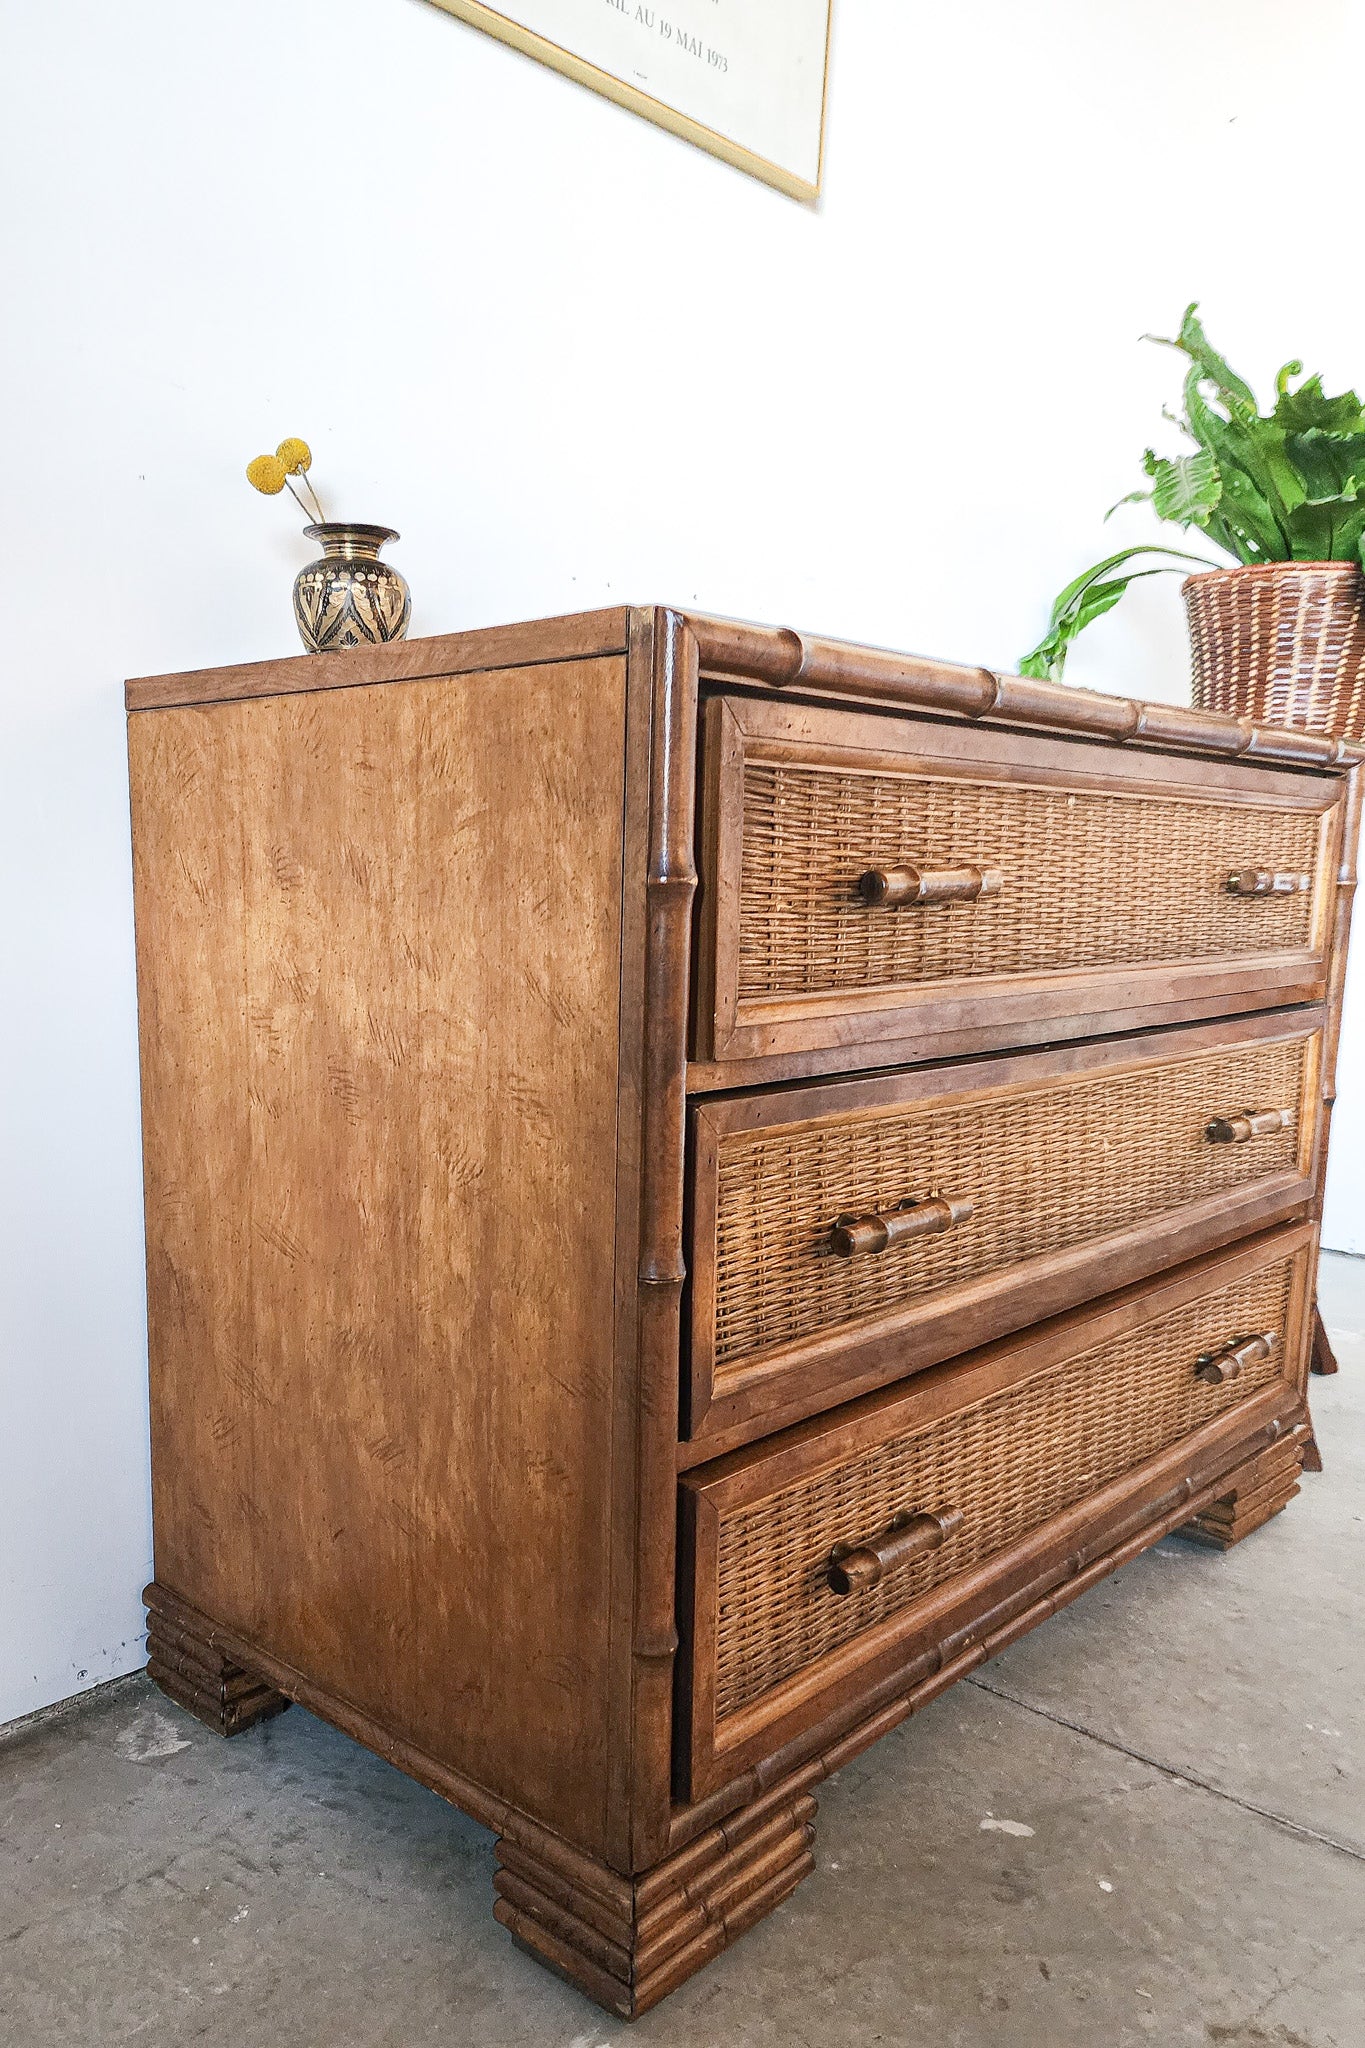 Vintage Wicker Accented Chest of Drawers - Reclaimed Mt. Goods